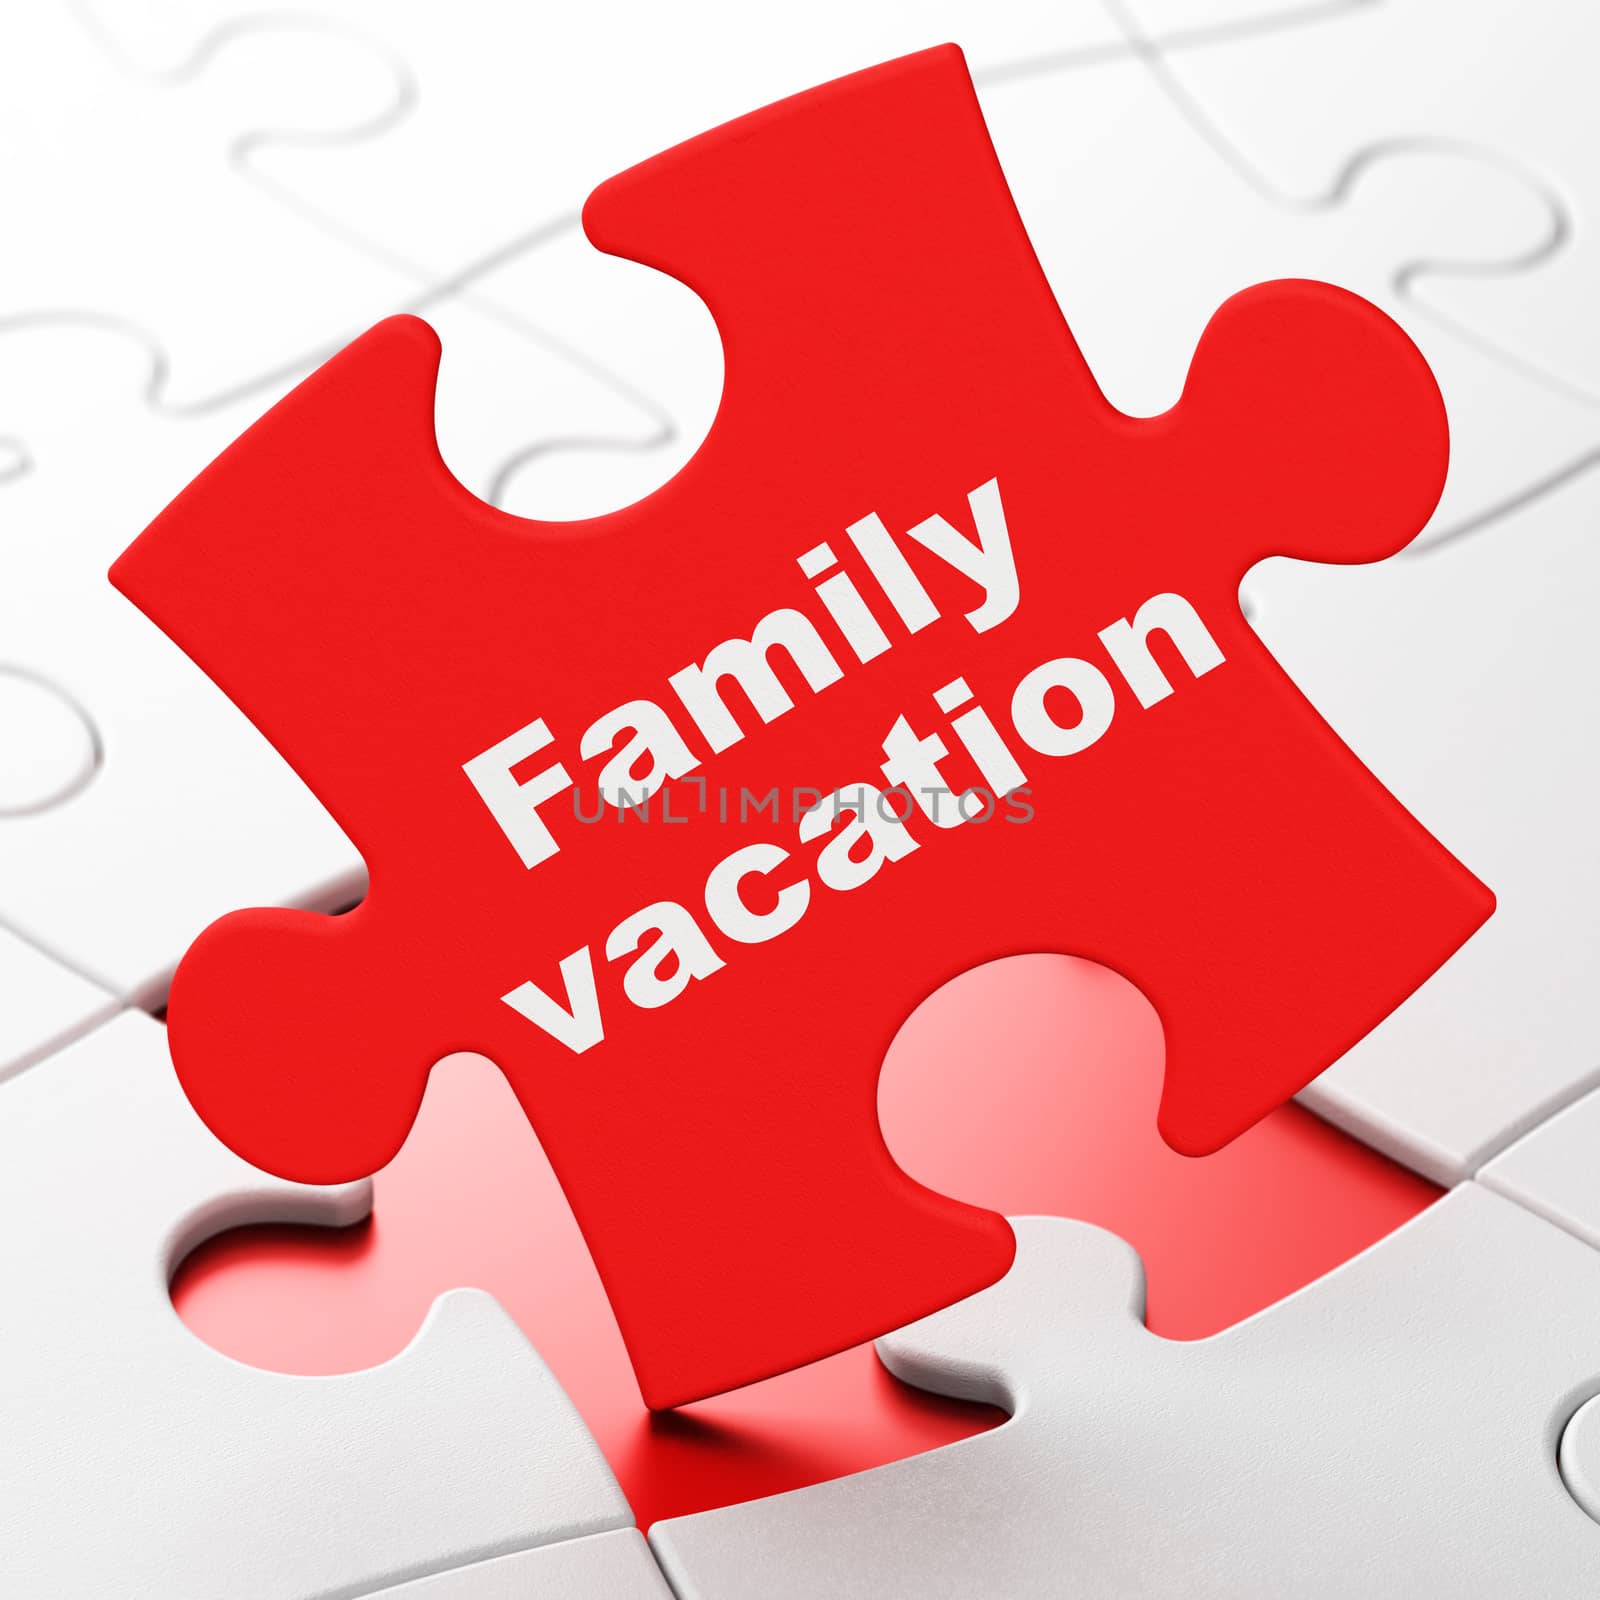 Vacation concept: Family Vacation on Red puzzle pieces background, 3D rendering